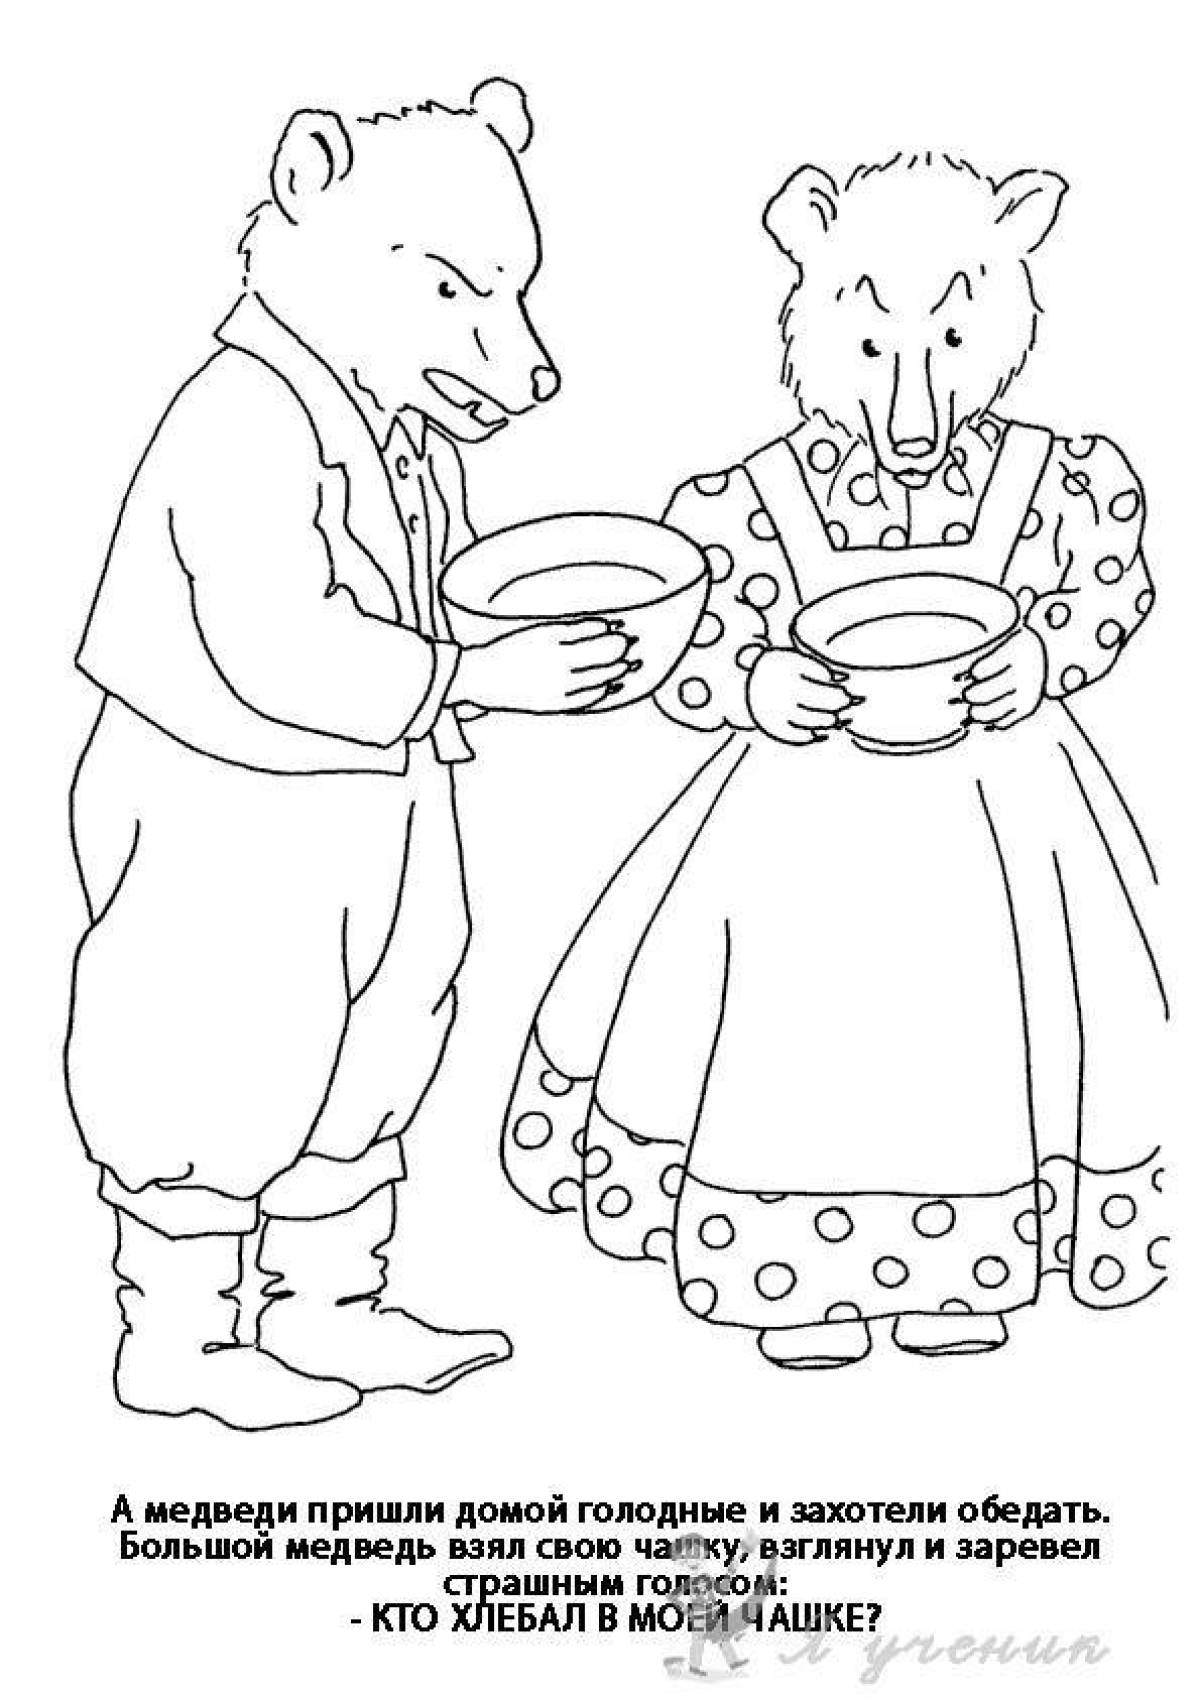 Playtime coloring page of the three bears